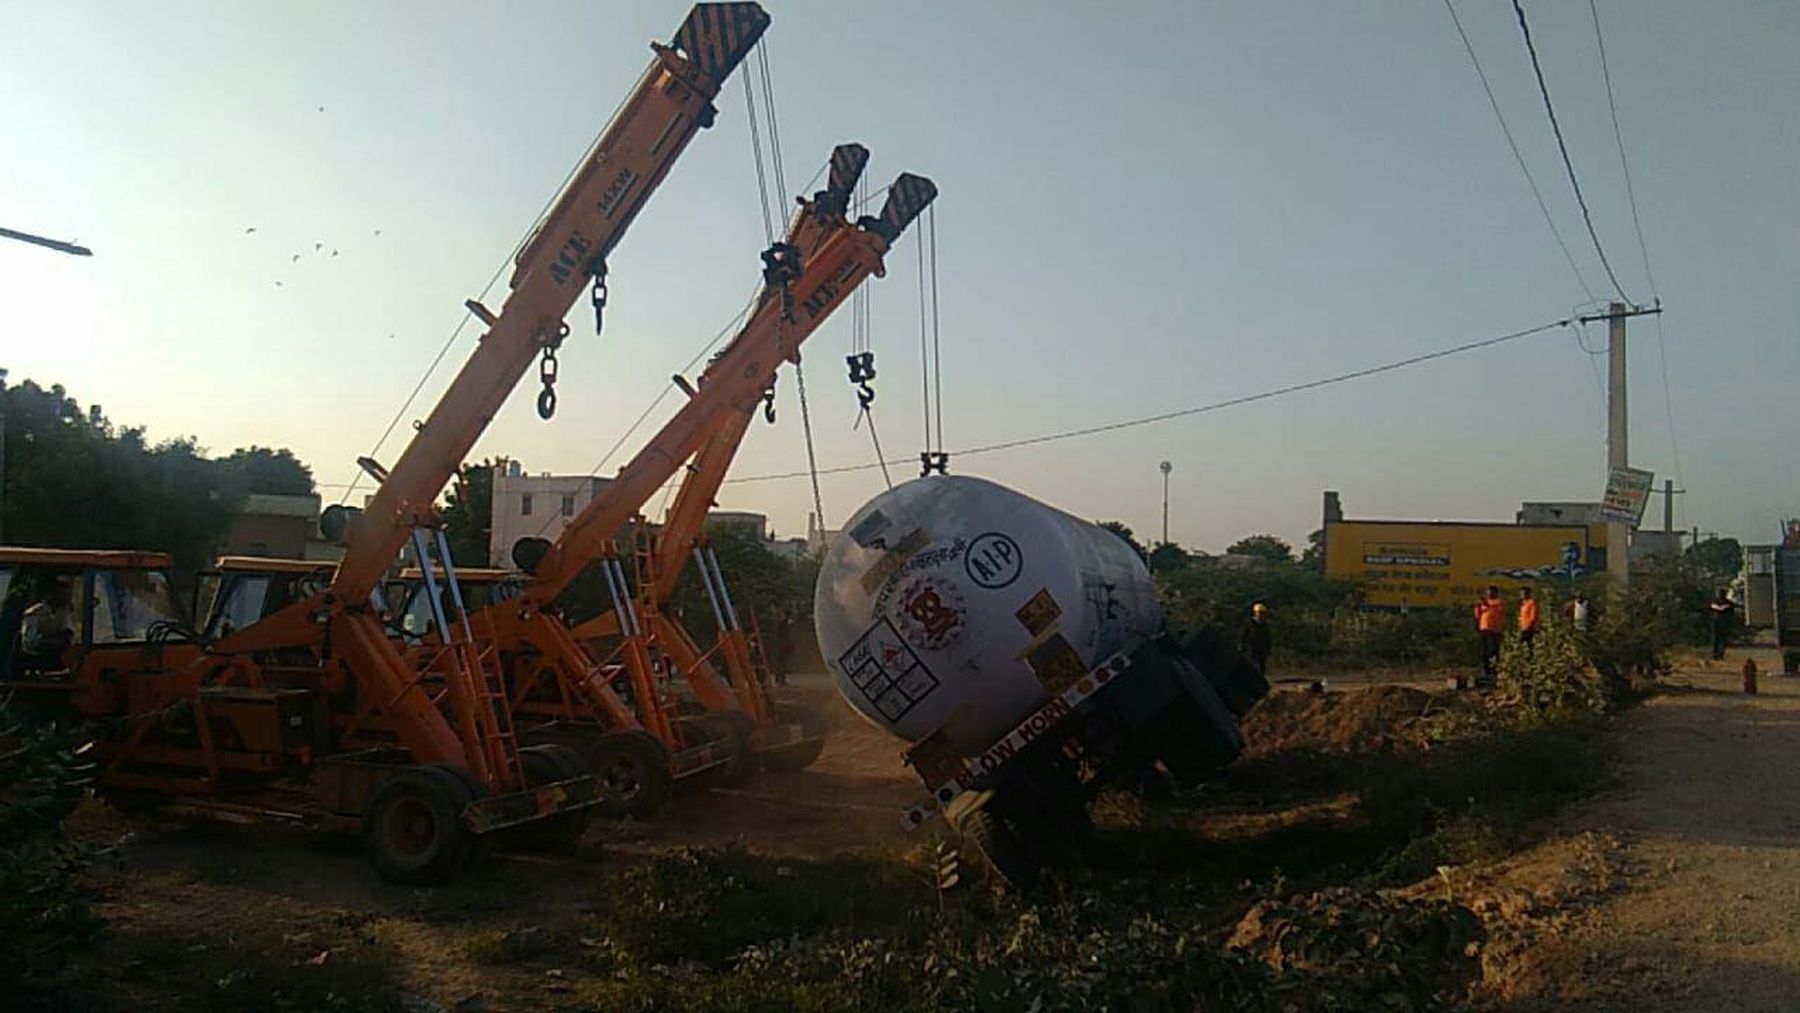 Gas tanker overturned in the morning on the Nagaur bypass road